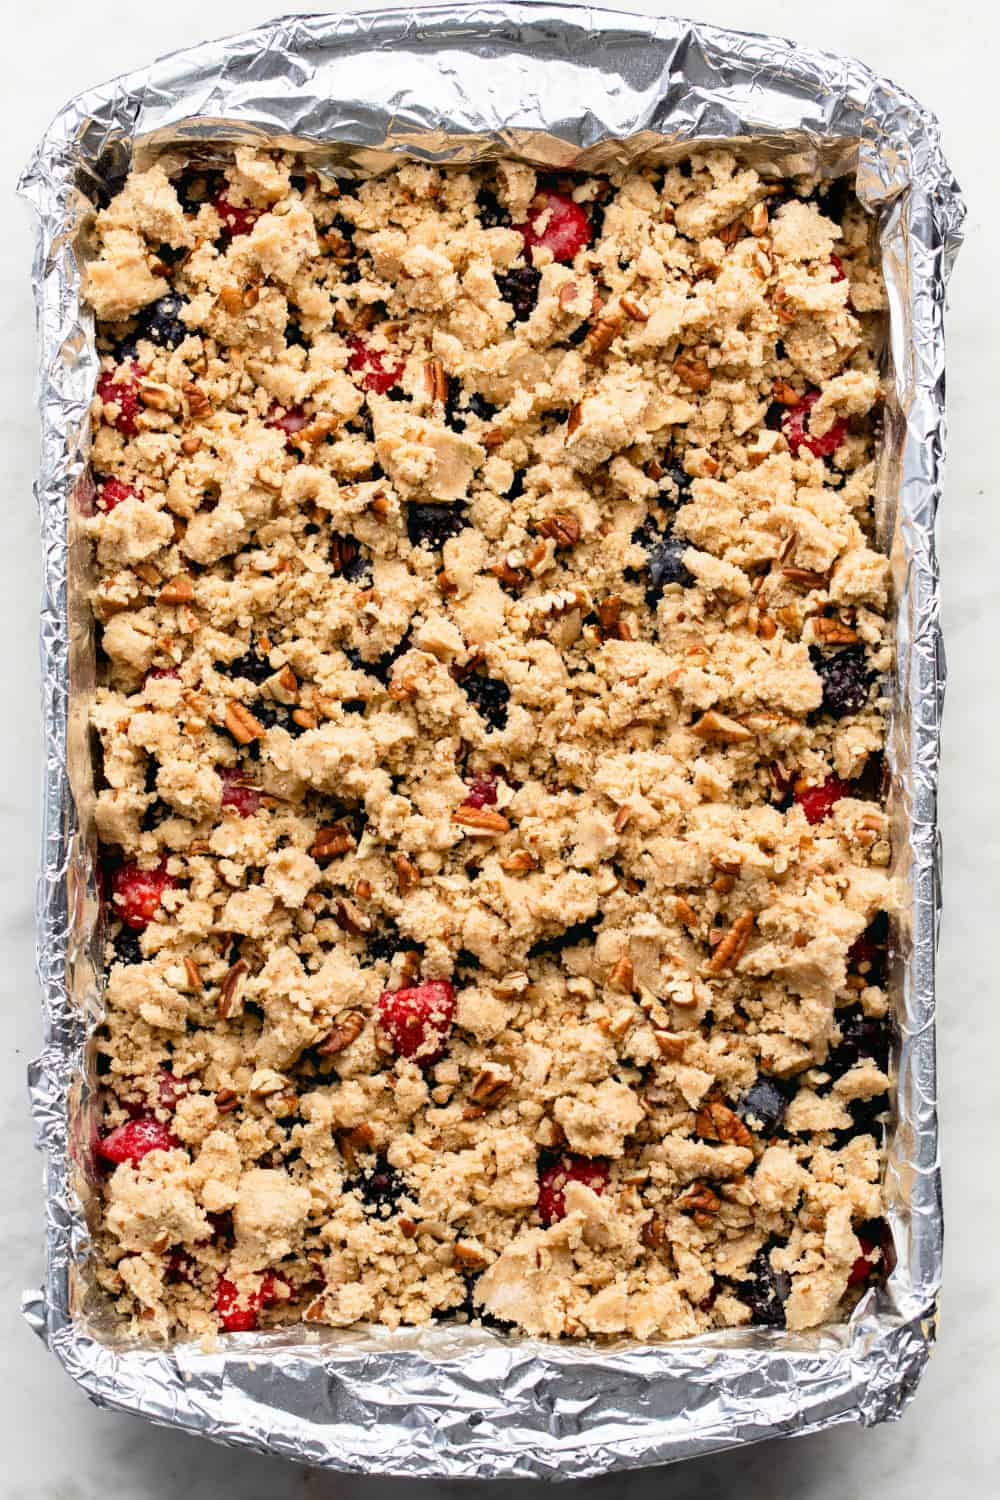 Top Berry Crumble Bars with a crumbly topping studded with pecans